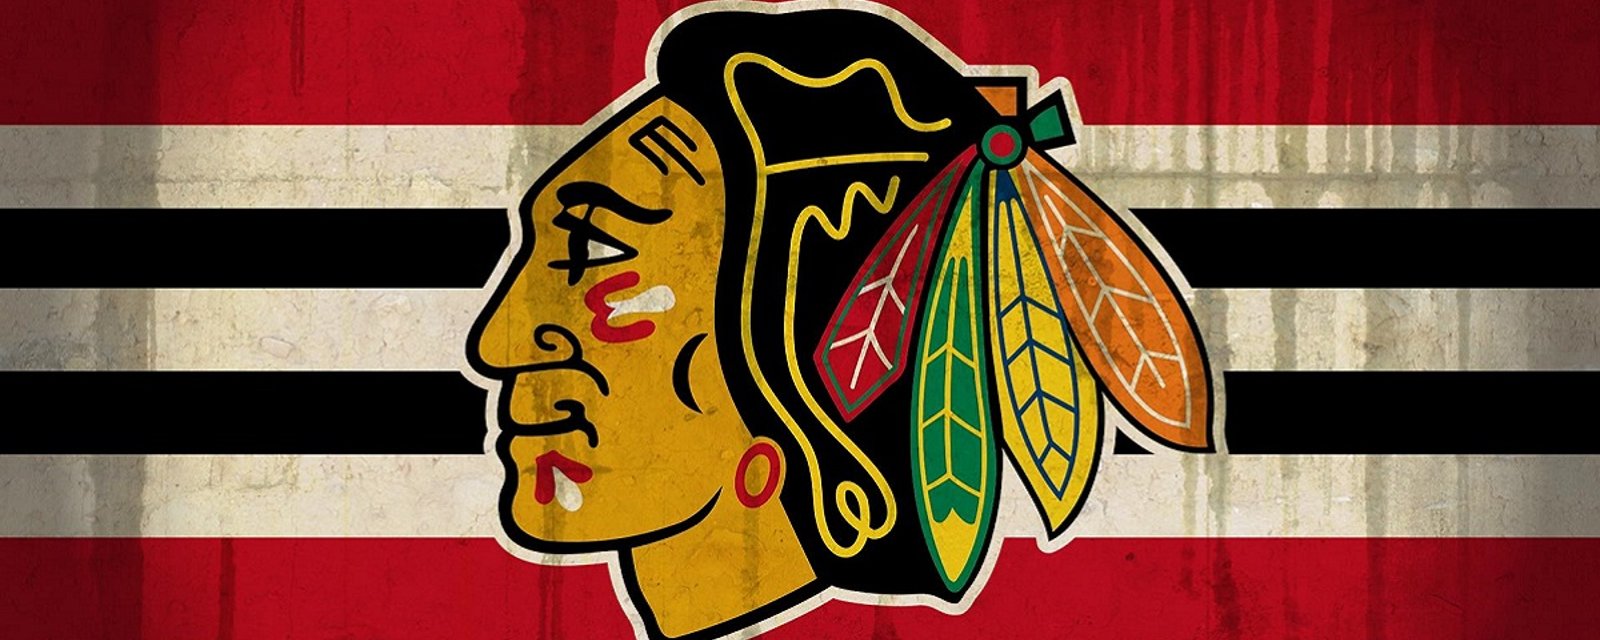 Blackhawks continue to face criticism in spite of “Land acknowledgement.”